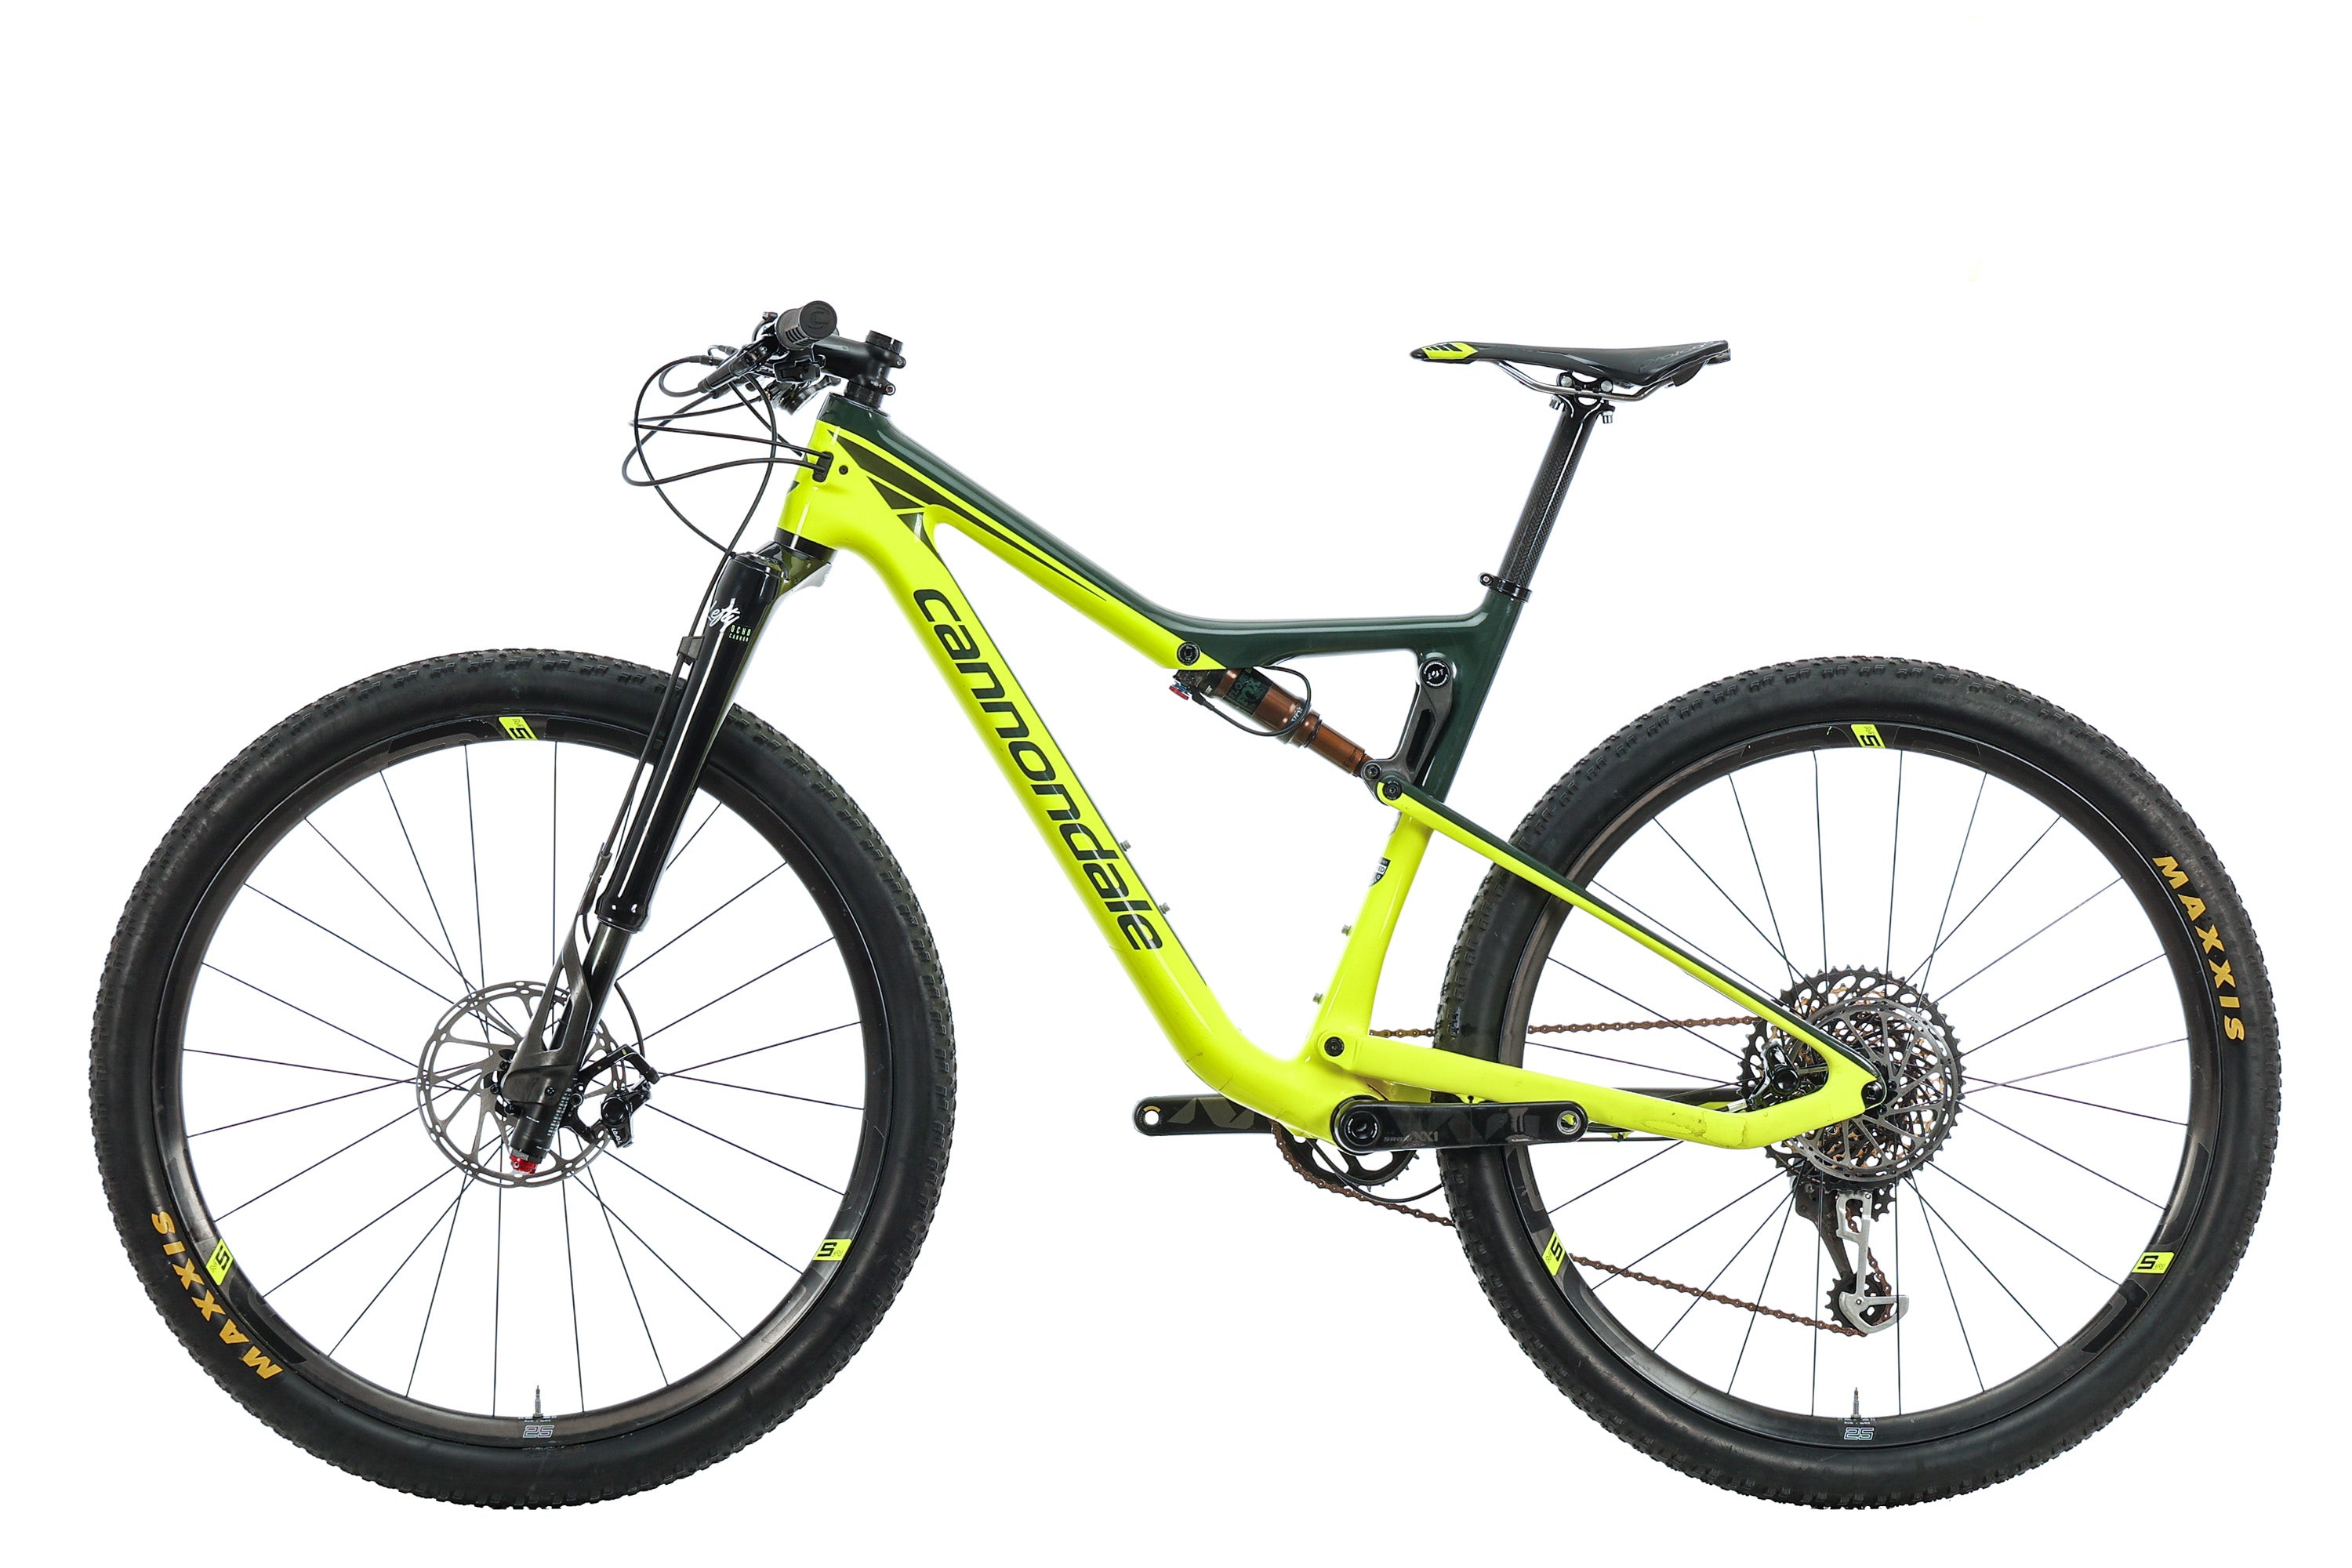 Parameters Lil Versterker Cannondale Scalpel-Si Hi-MOD World Cup Mountain Bike - 2019, Large |  Weight, Price, Specs, Geometry, Size Guide | The Pro's Closet